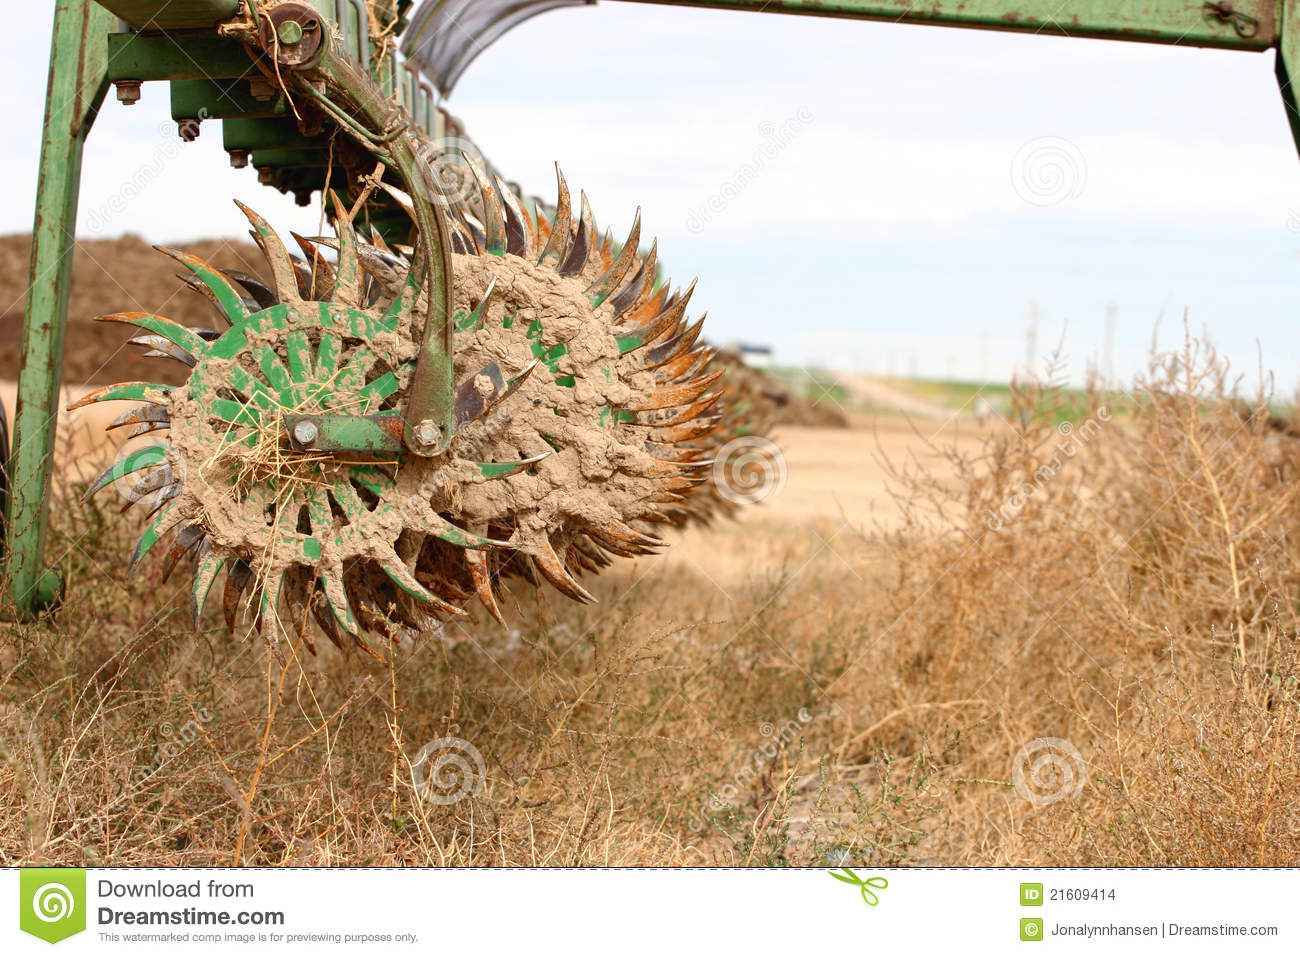 Old Plow Stock Images   Image  21609414